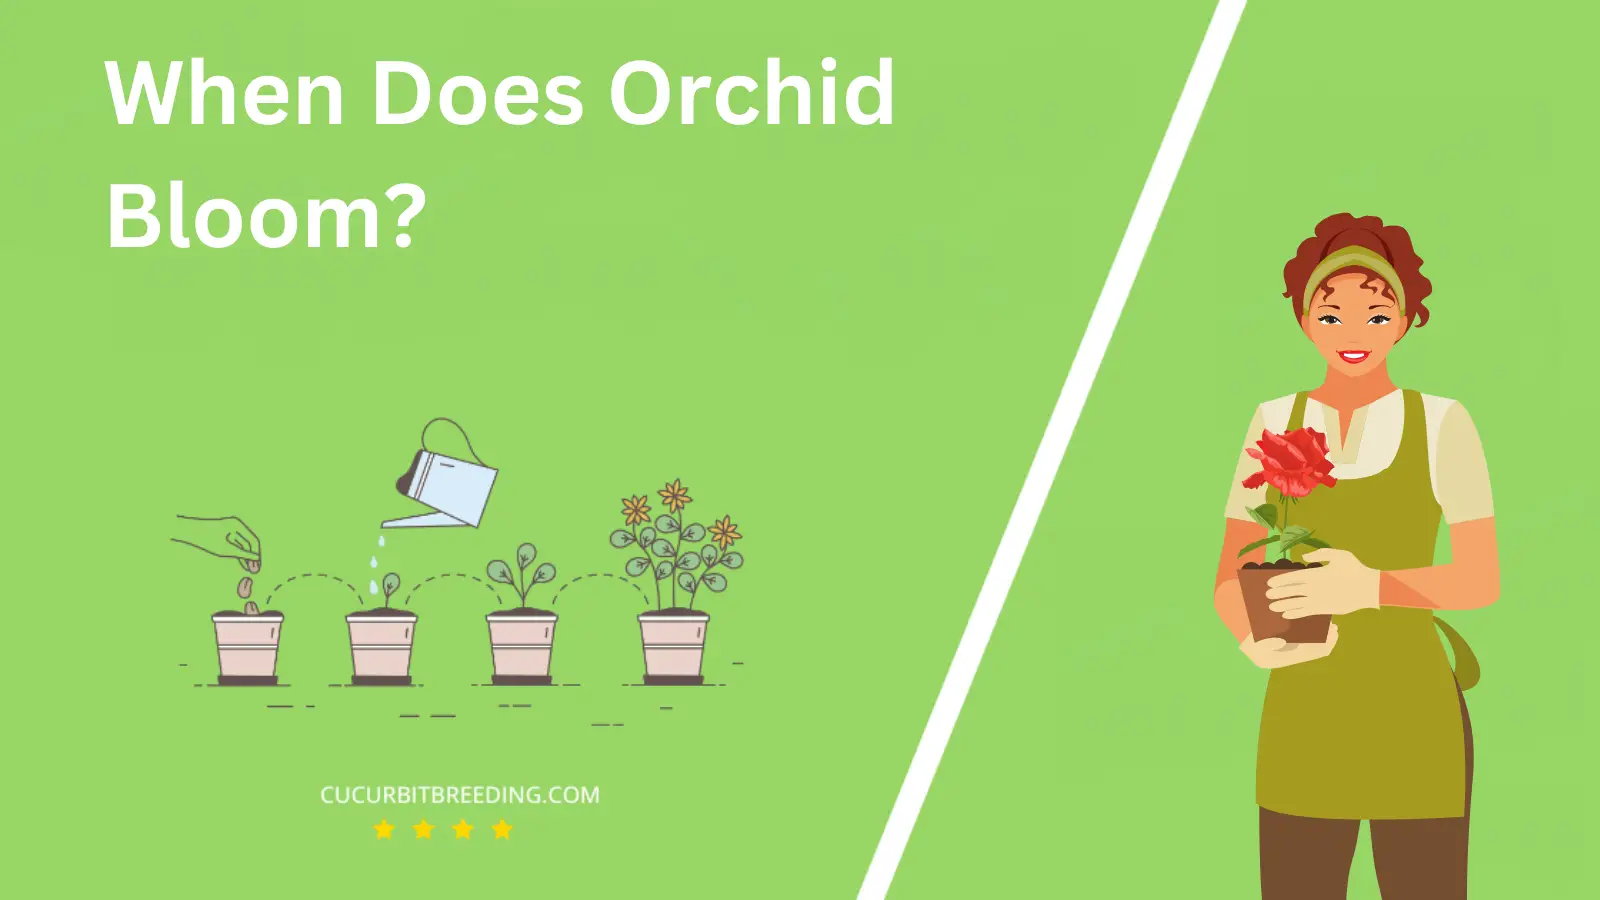 When Does Orchid Bloom?